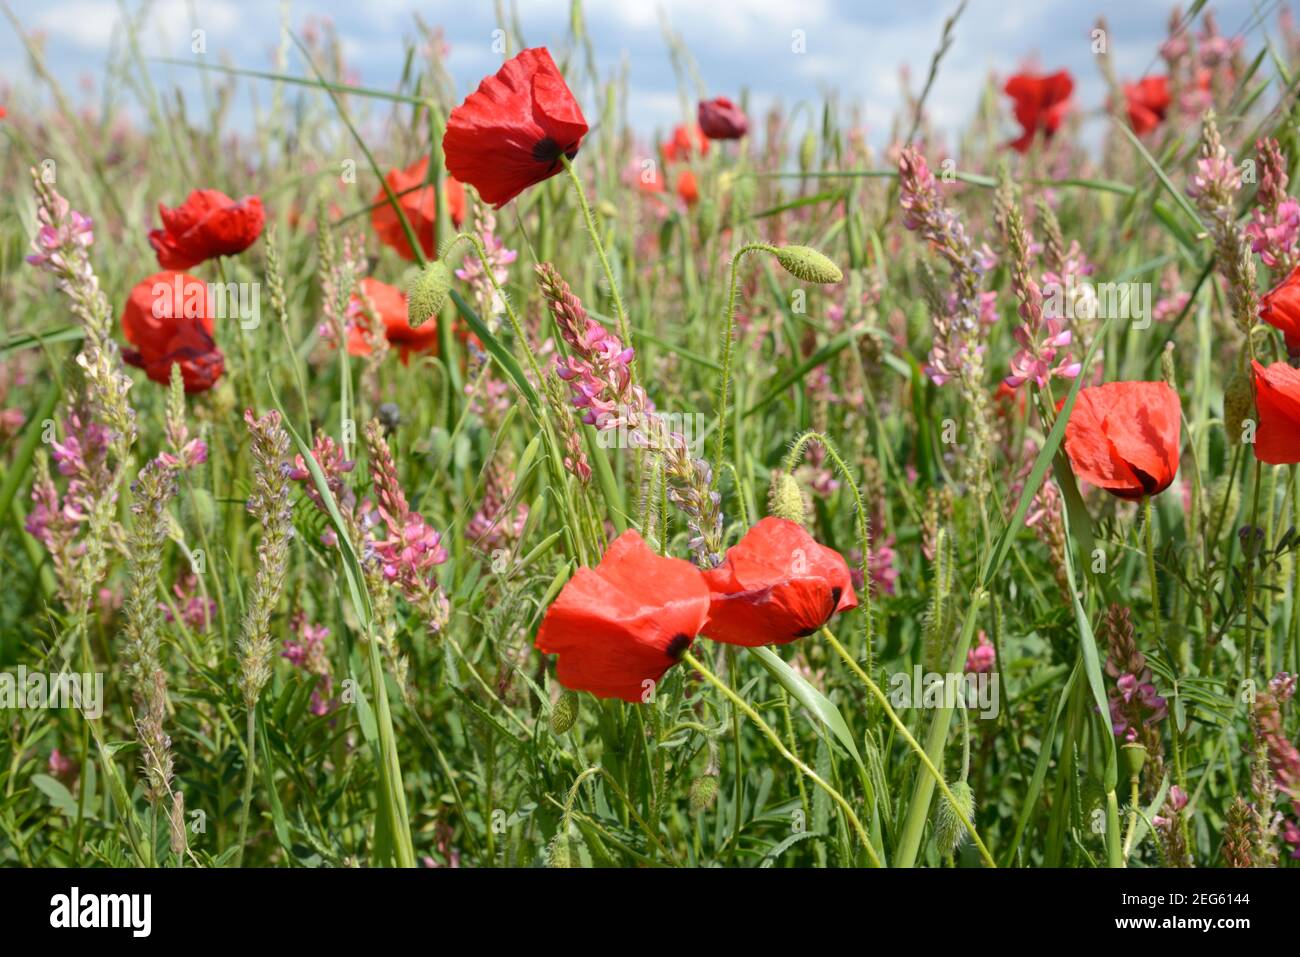 Field of Common Poppies, Papaver somniferum, and Common Sainfoin, Onobrychis viciifolia, Valensole Plateau Provence France Stock Photo